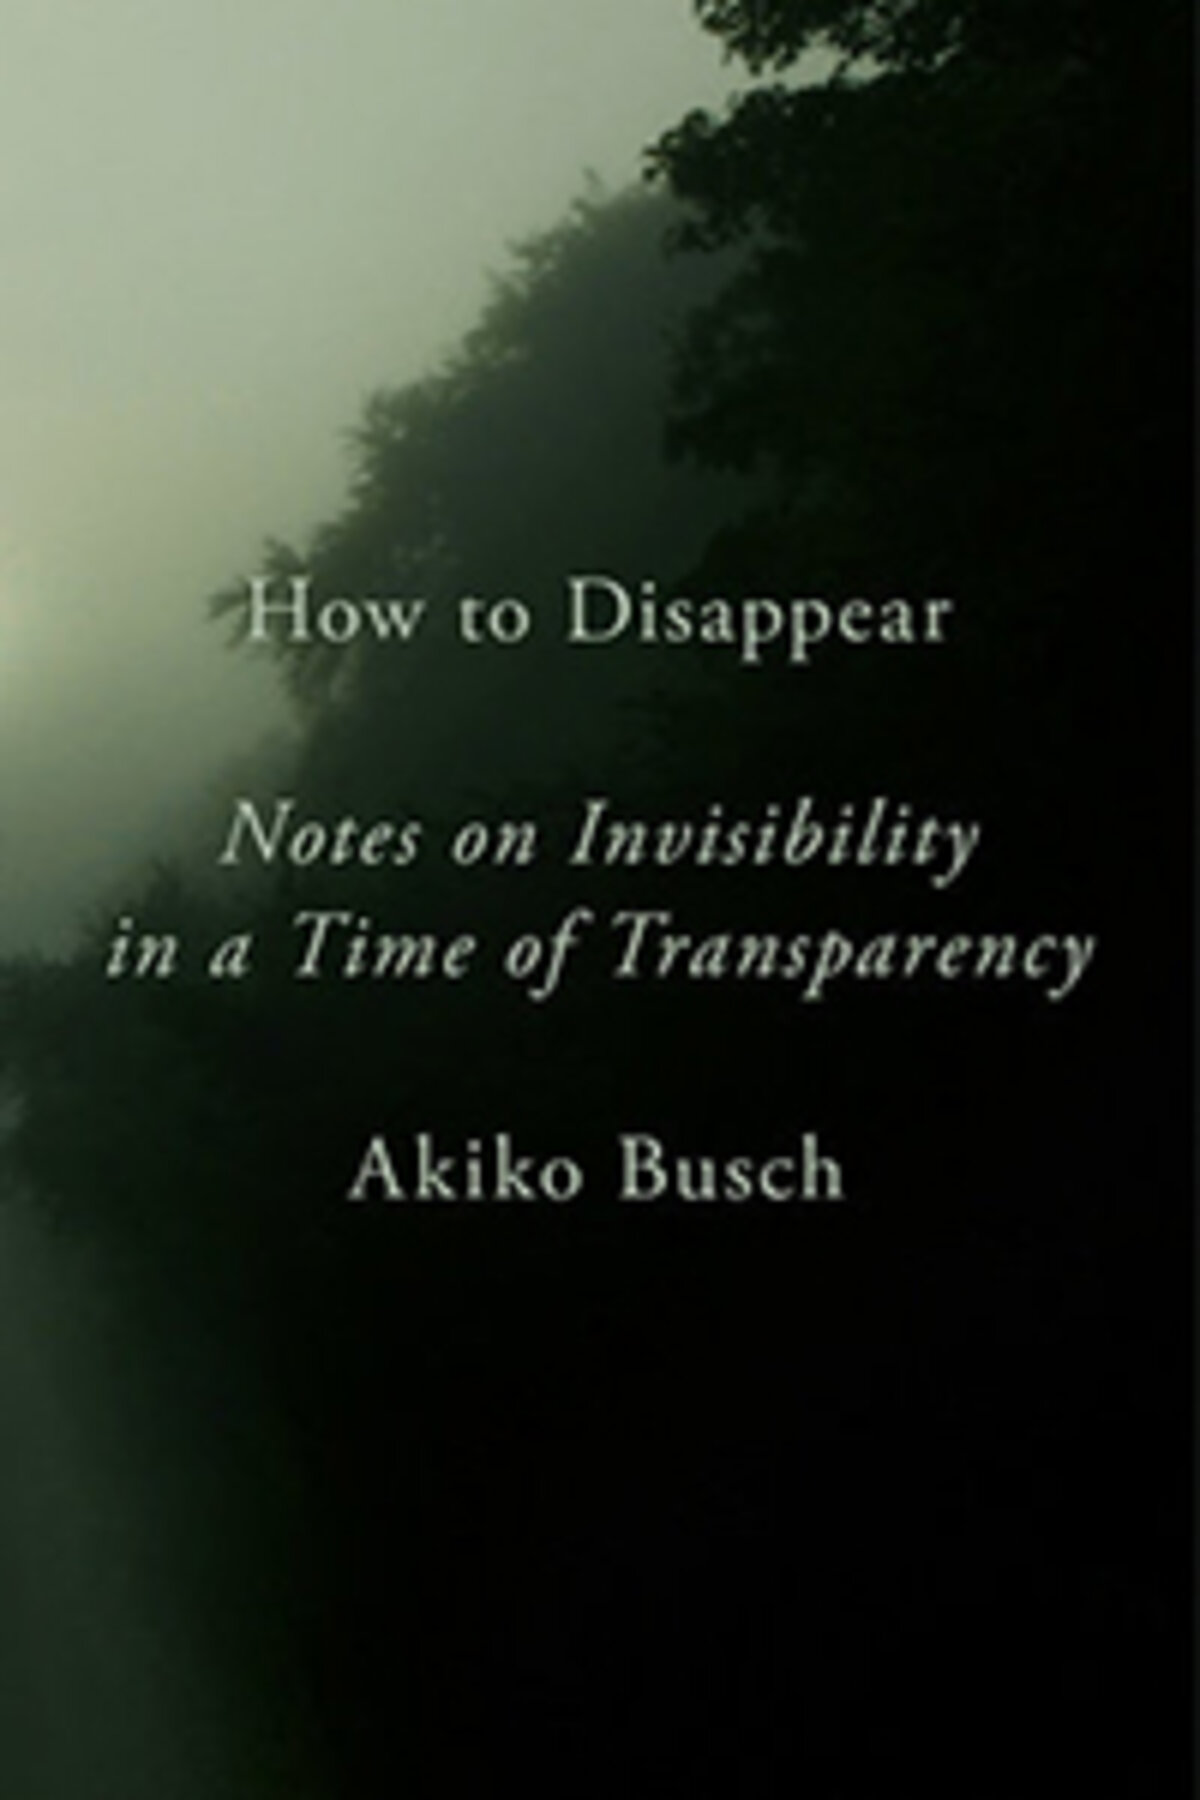 Trees on a book cover How to Disappear by AKIKO BUSCH